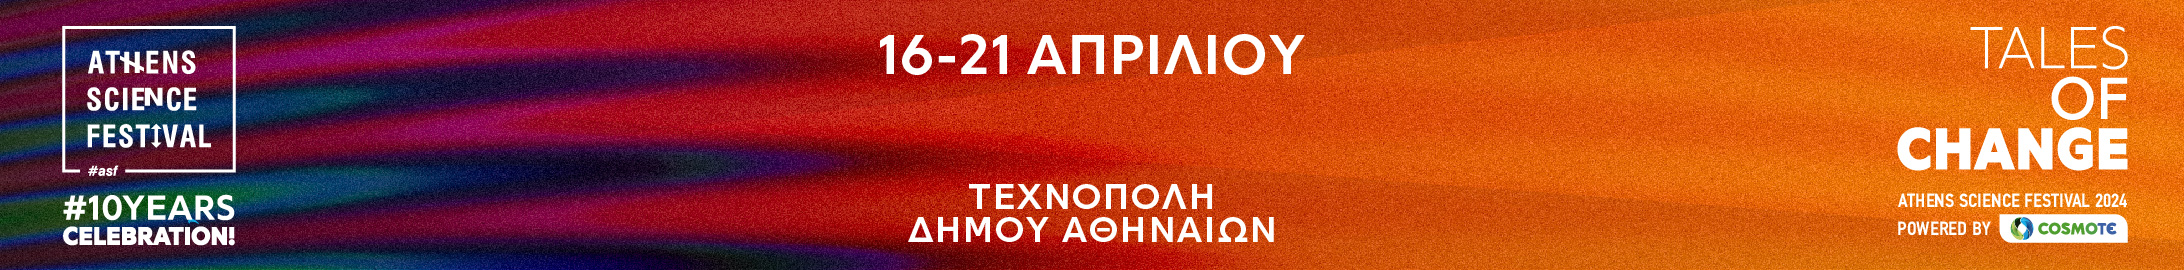 Athens Science Festival 2024|Tales of Change